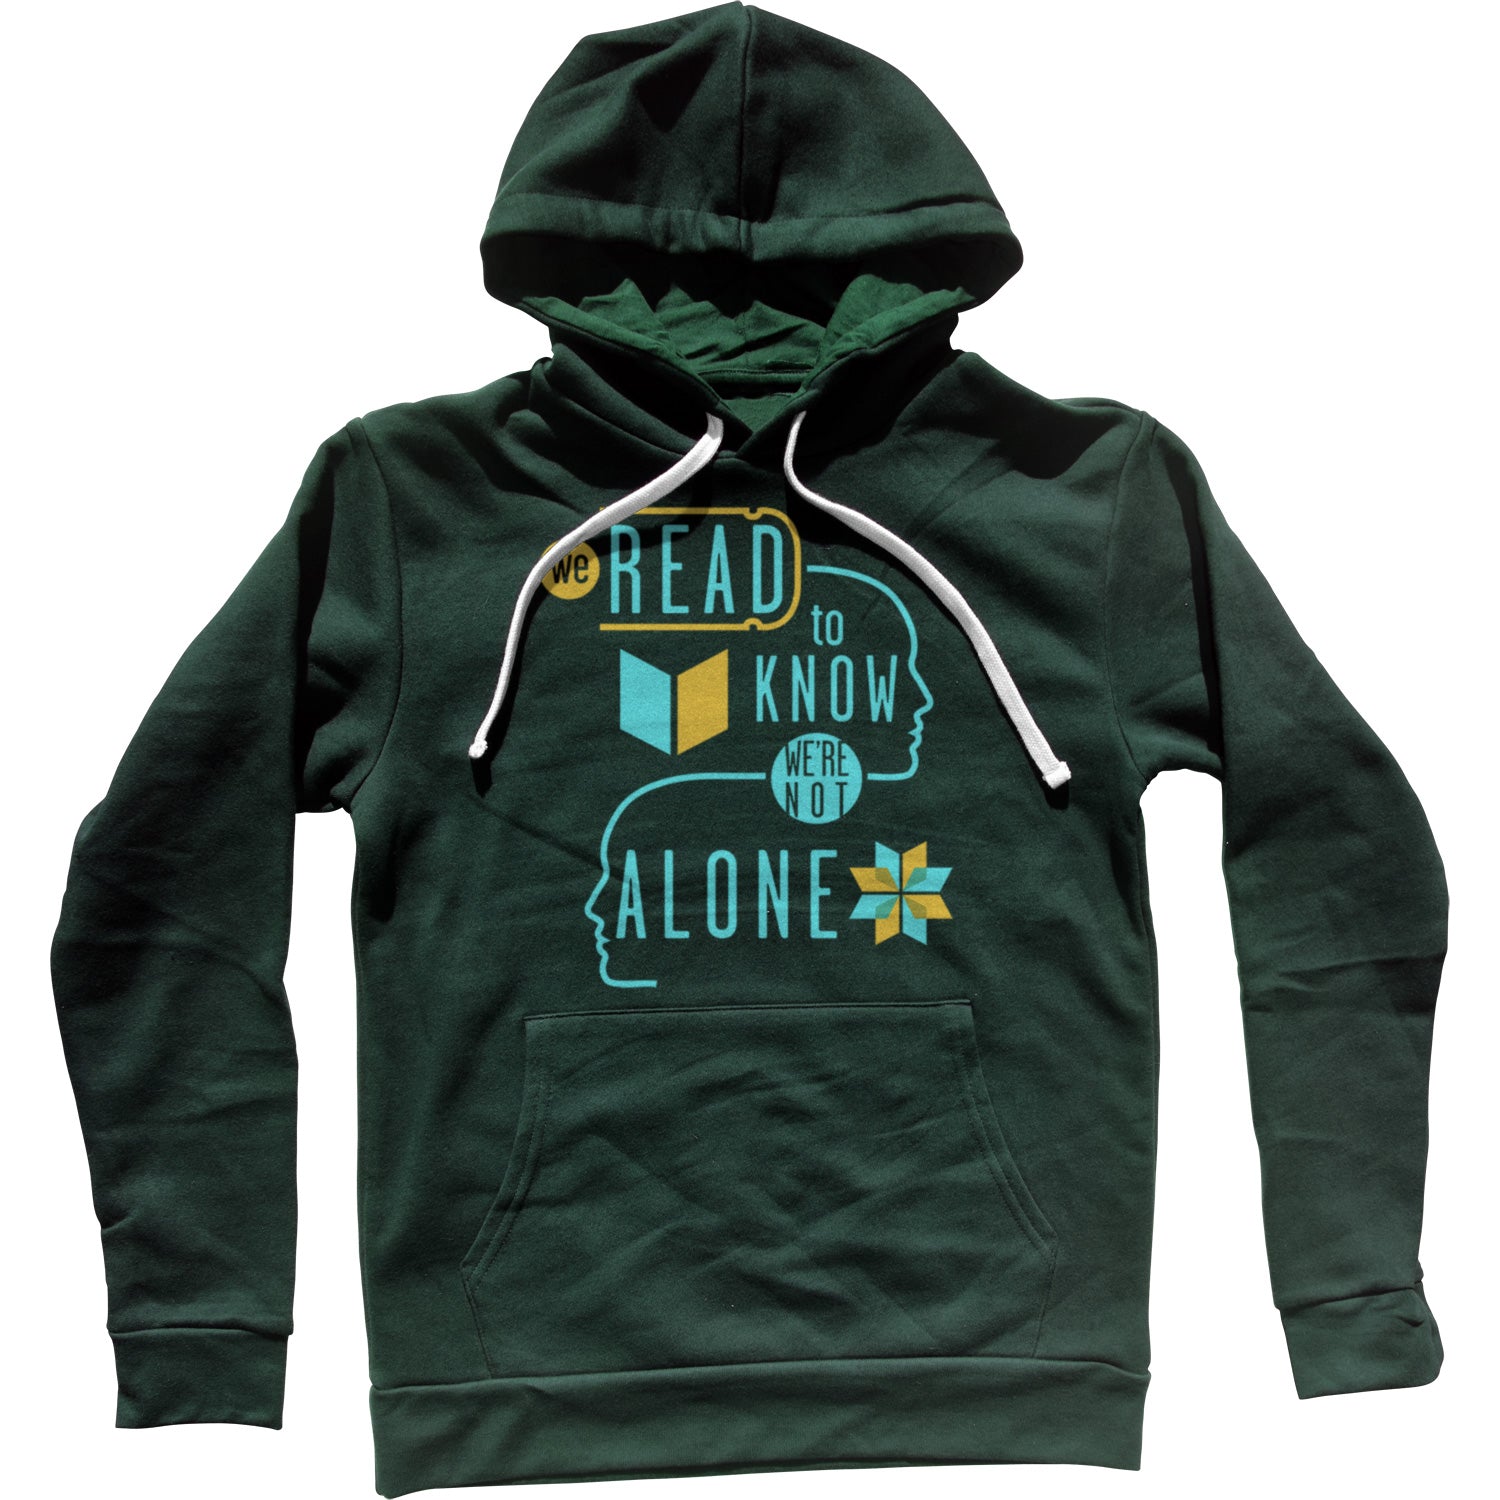 We Read to Know We are Not Alone Unisex Hoodie